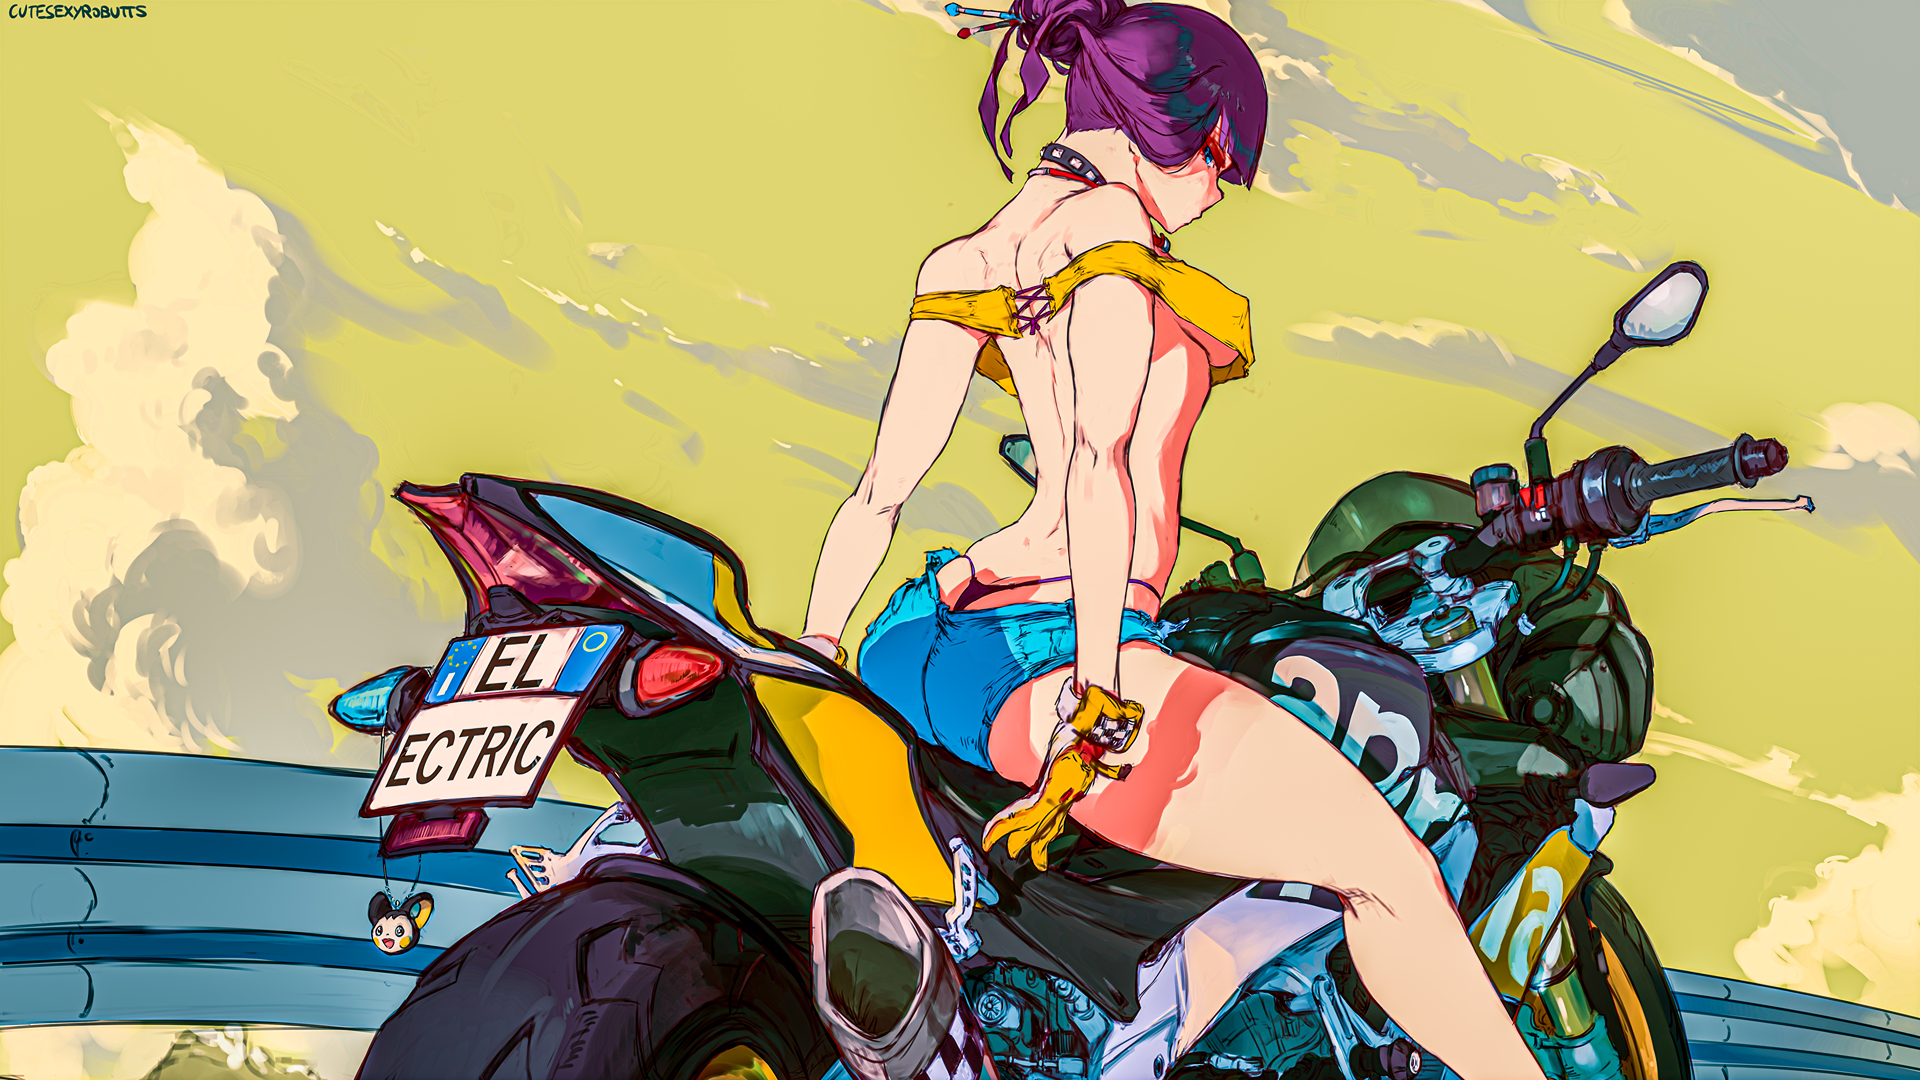 Anime 1920x1080 Elesa (Pokemon) underboob butt floss butt crack thong jean shorts short shorts thighs motorcycle belly bare midriff crop top yellow tops blue shorts gloves highway choker ponytail purple hair bangs long hair hairbun looking back looking at viewer rearview mirror vehicle tires Pokémon Nintendo video games alternate costume taillights licence plates purple thong nipple bulge Cutesexyrobutts video game girls Emolga text anime girls ass big boobs wide hips lingerie purple lingerie